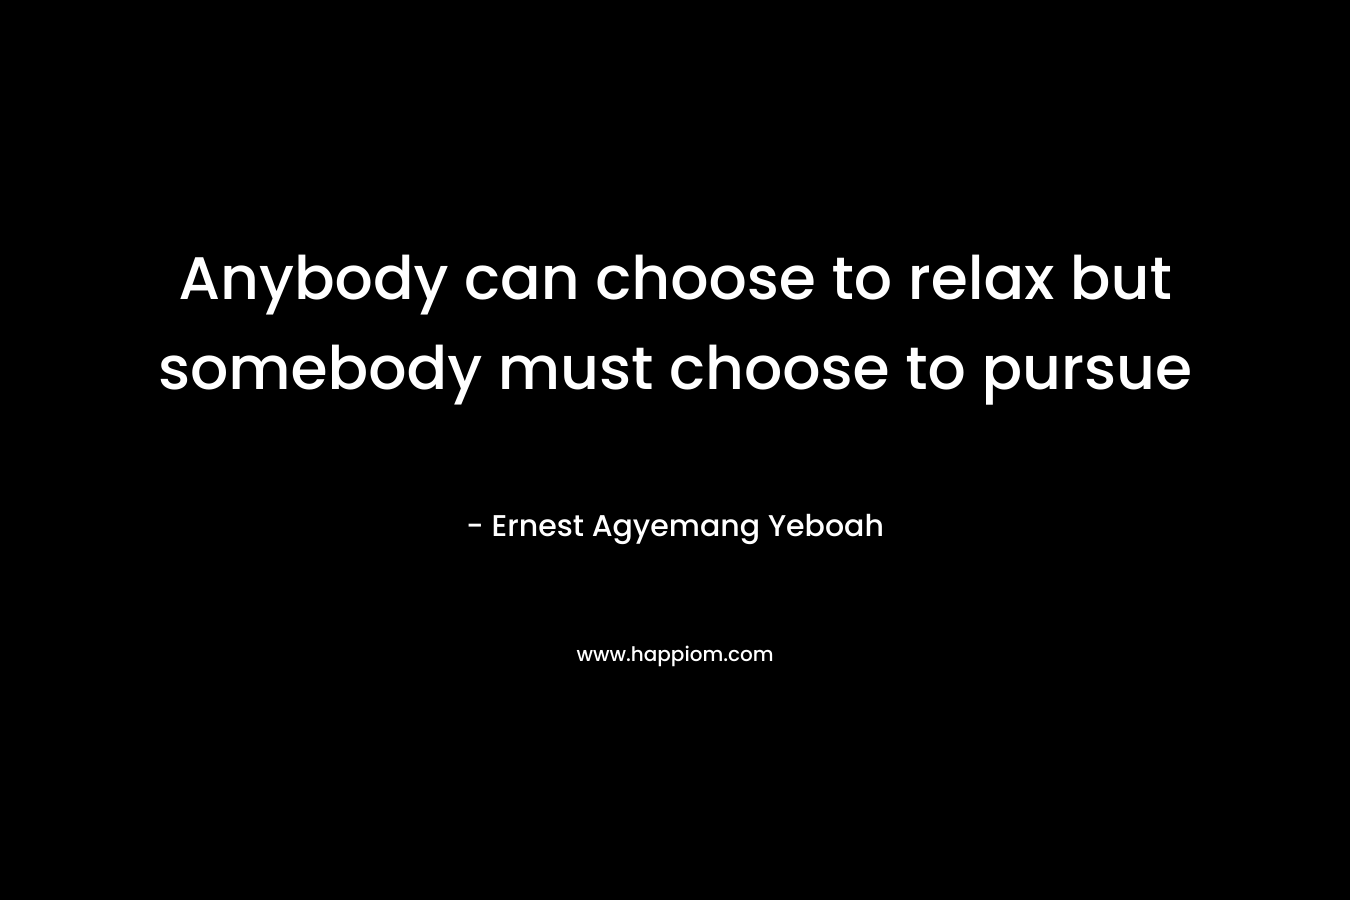 Anybody can choose to relax but somebody must choose to pursue